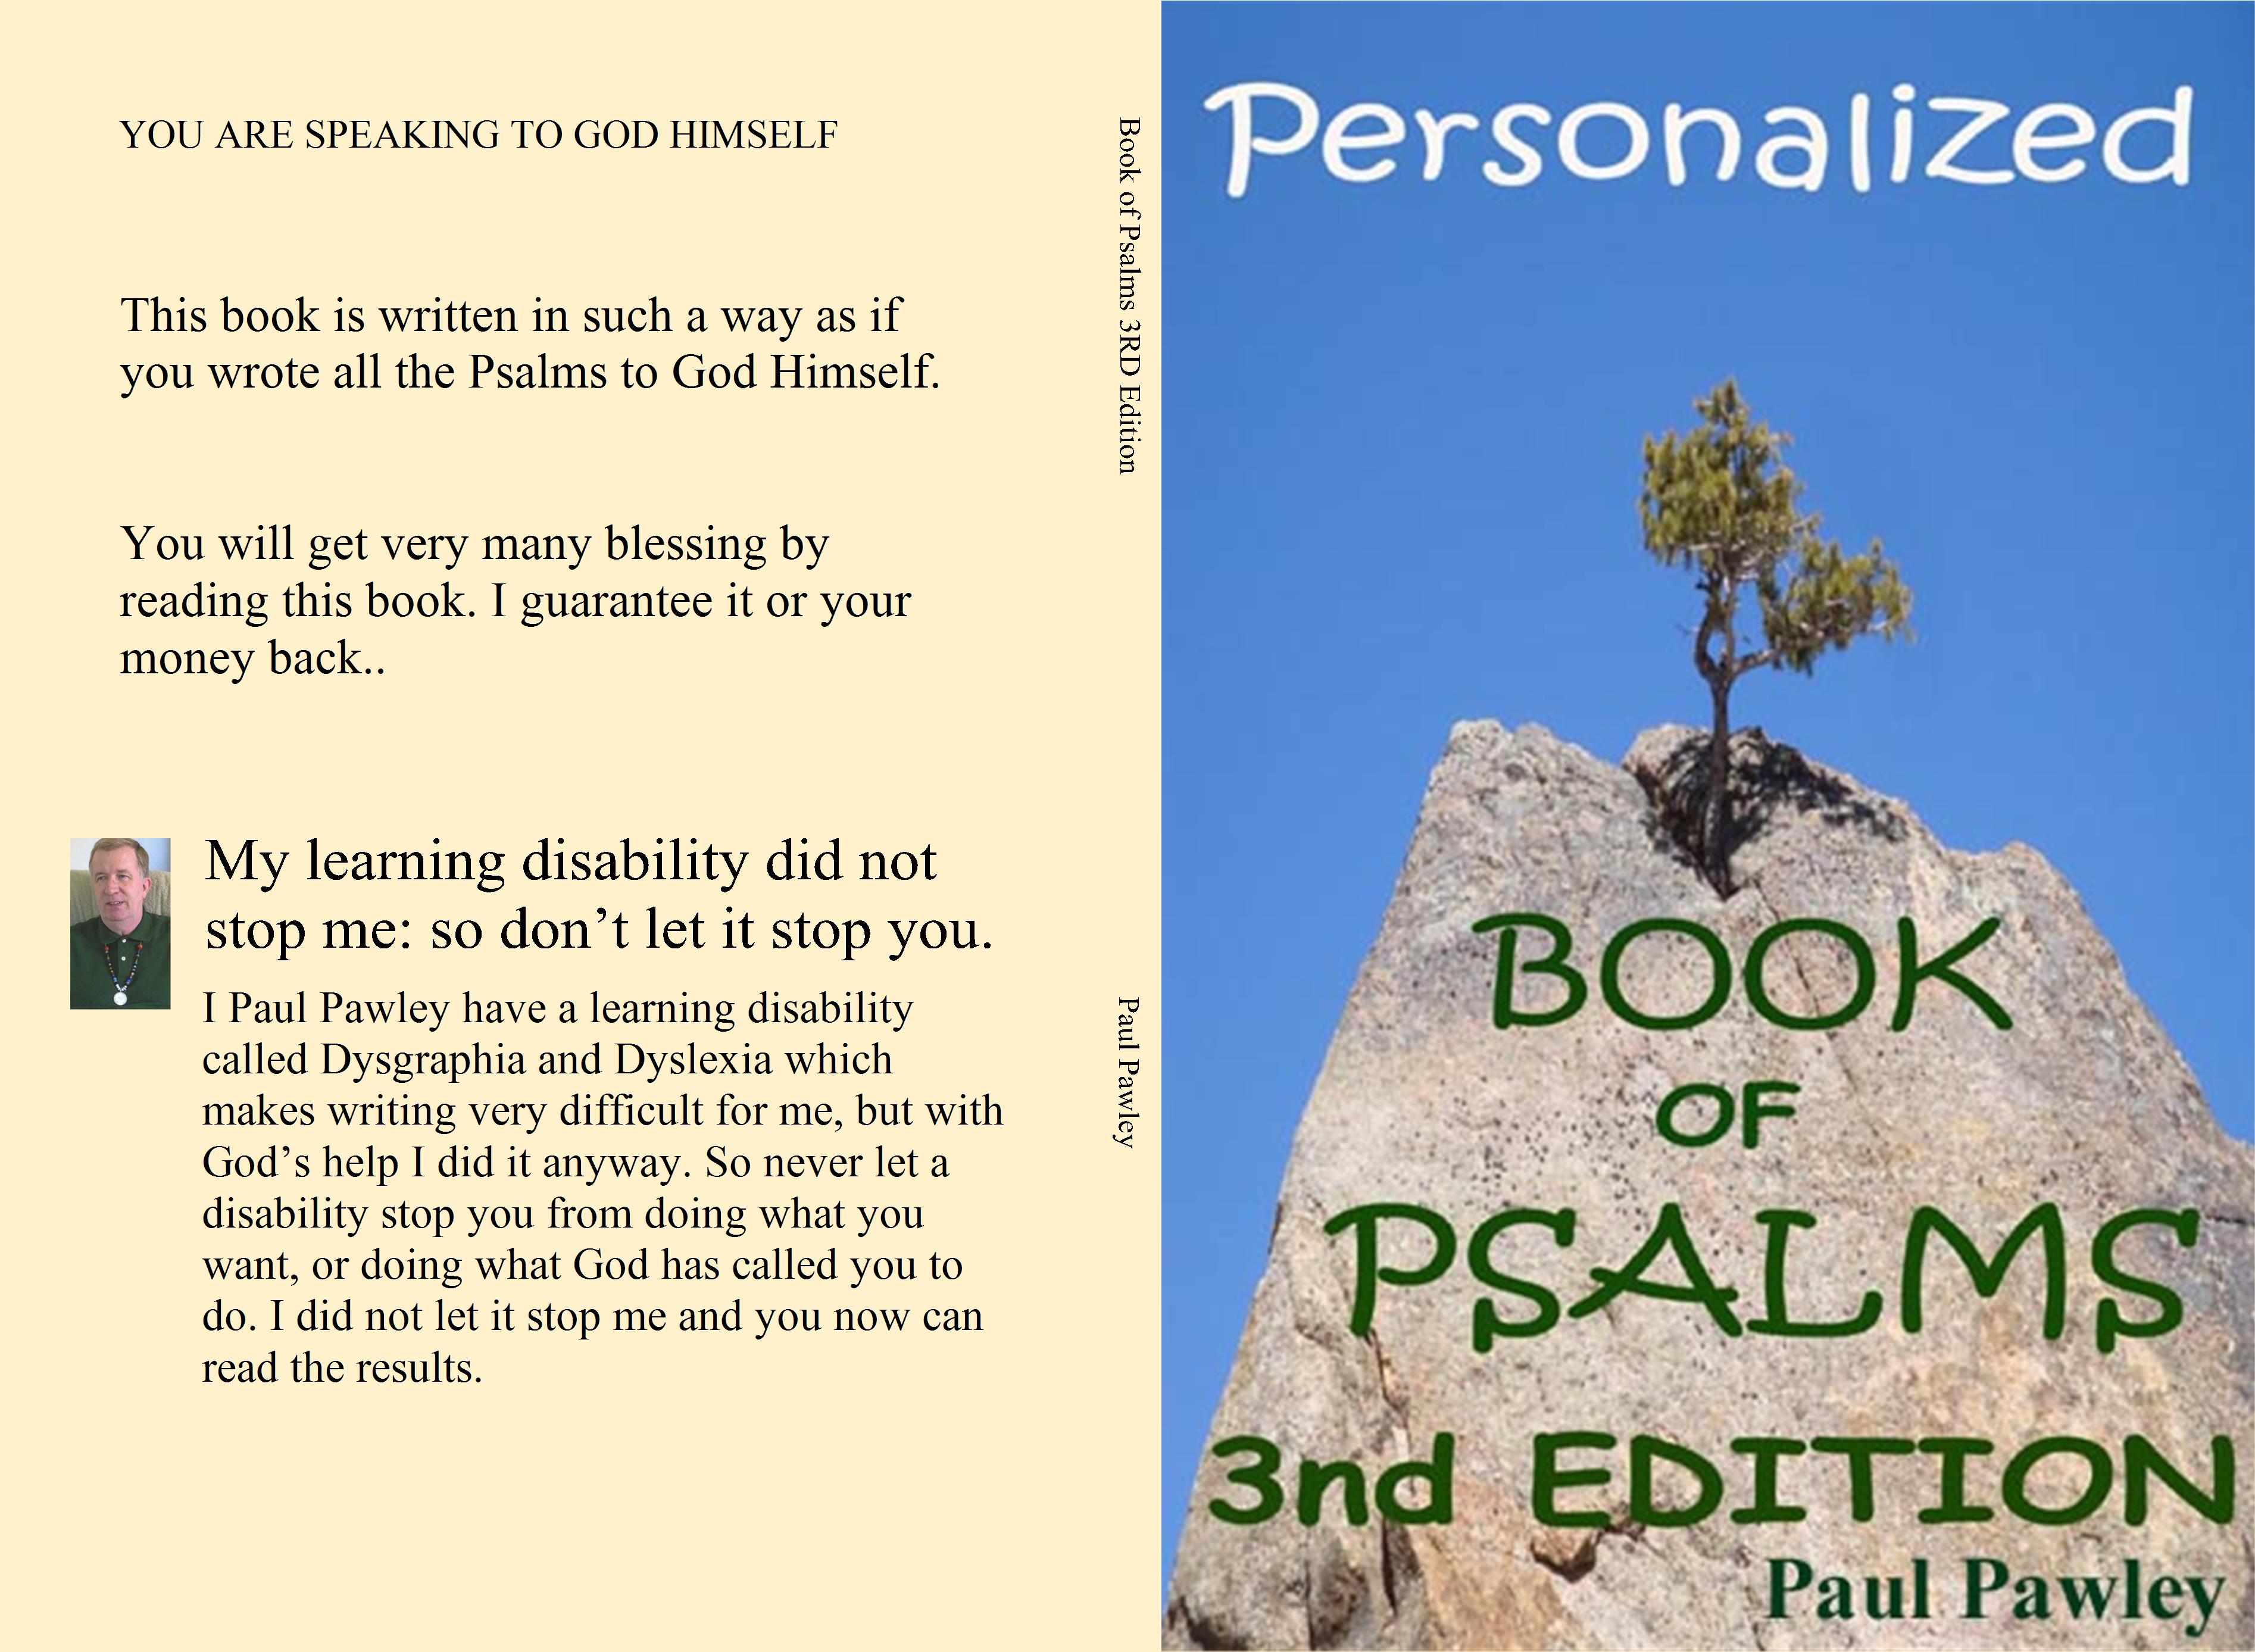 Personalized Book of Psalms 3RD Edition cover image